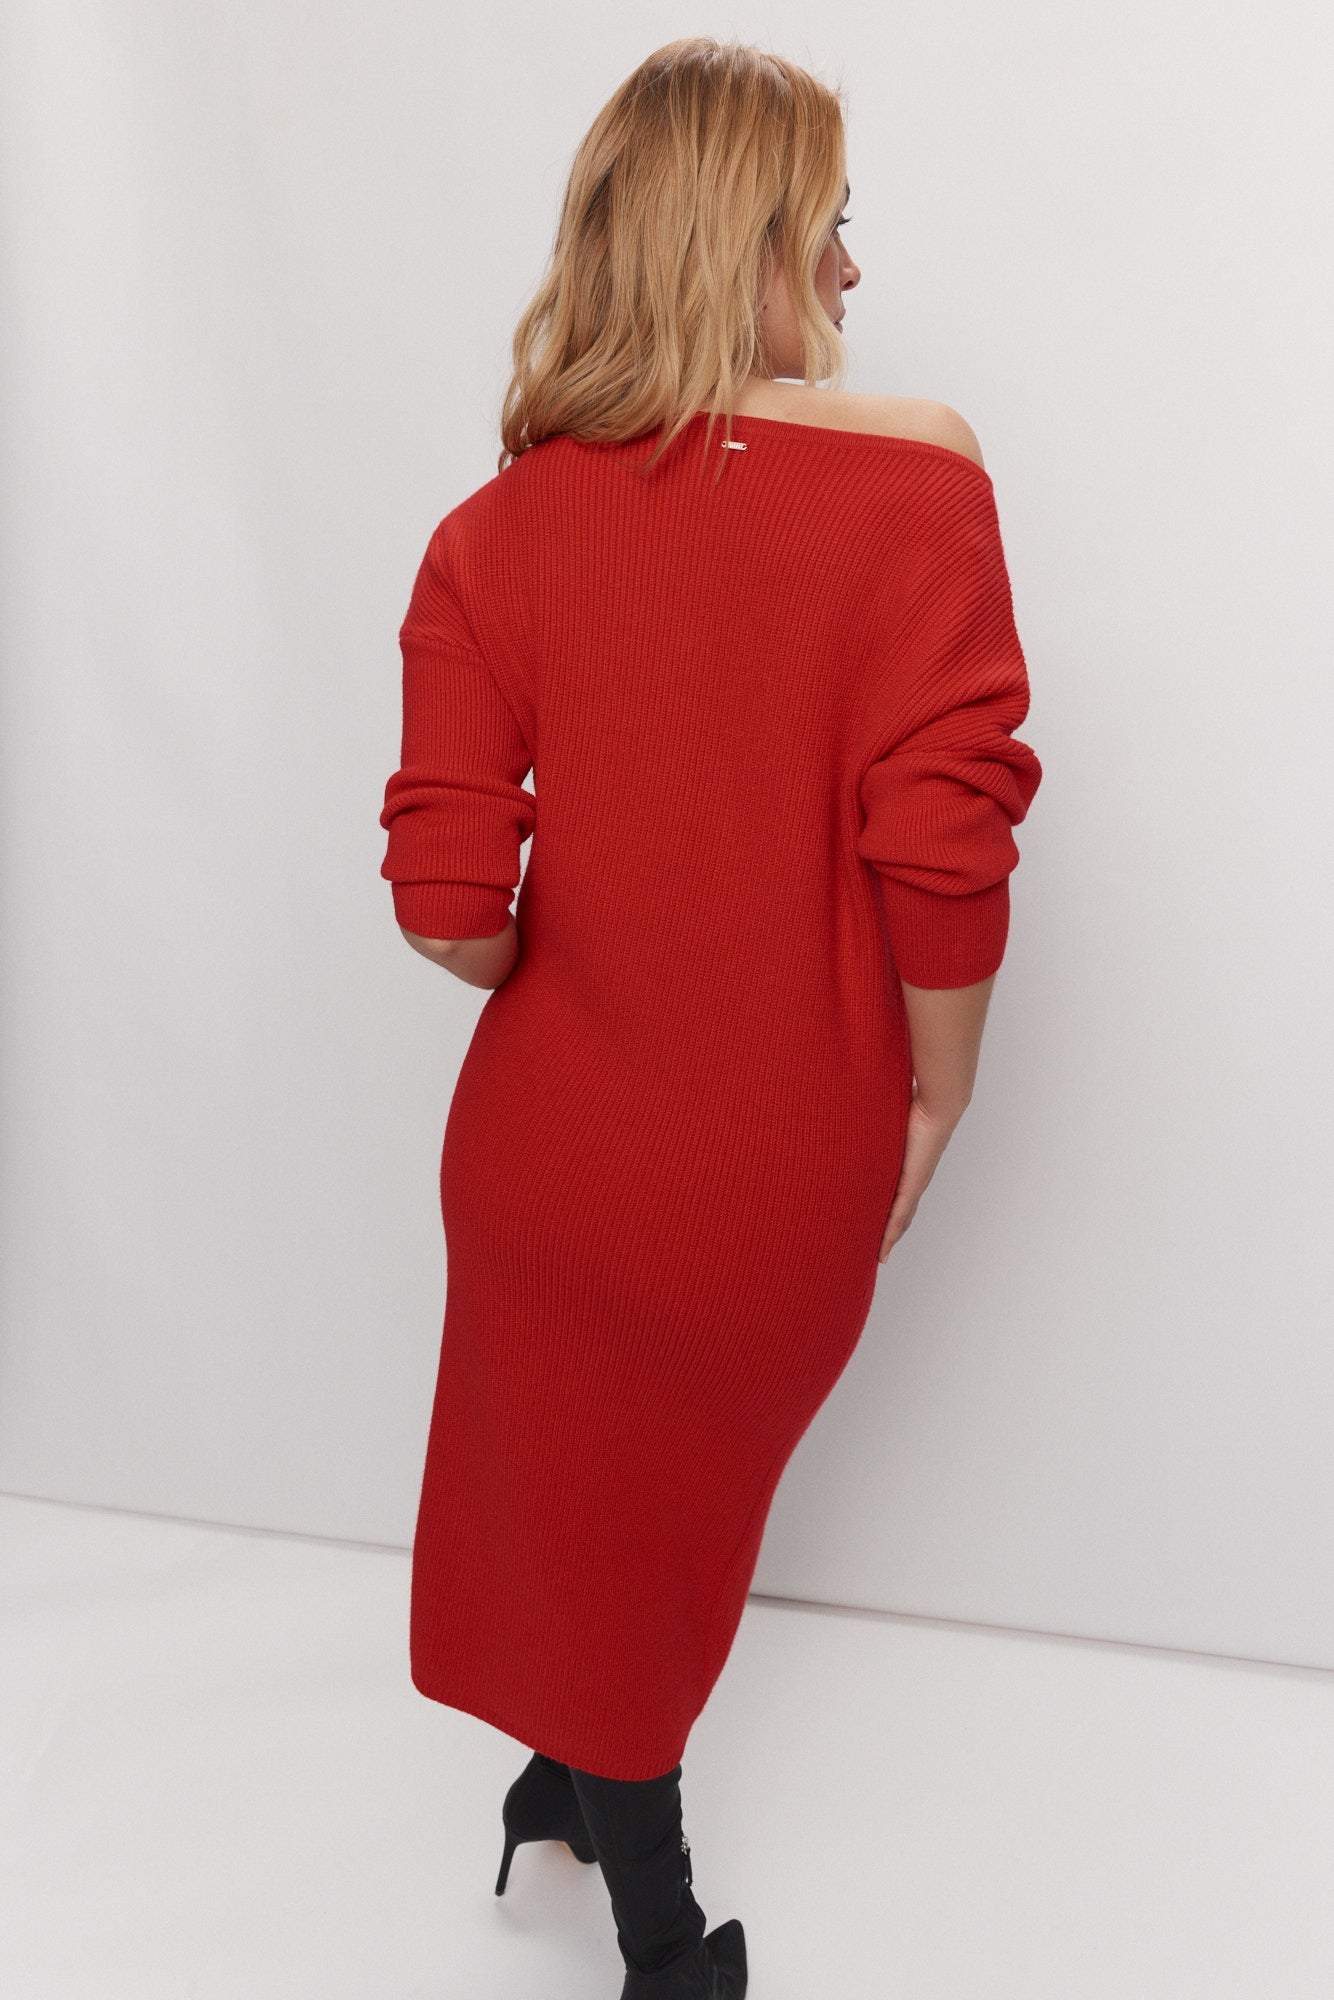 Long red knit dress with boat neckline | Jua